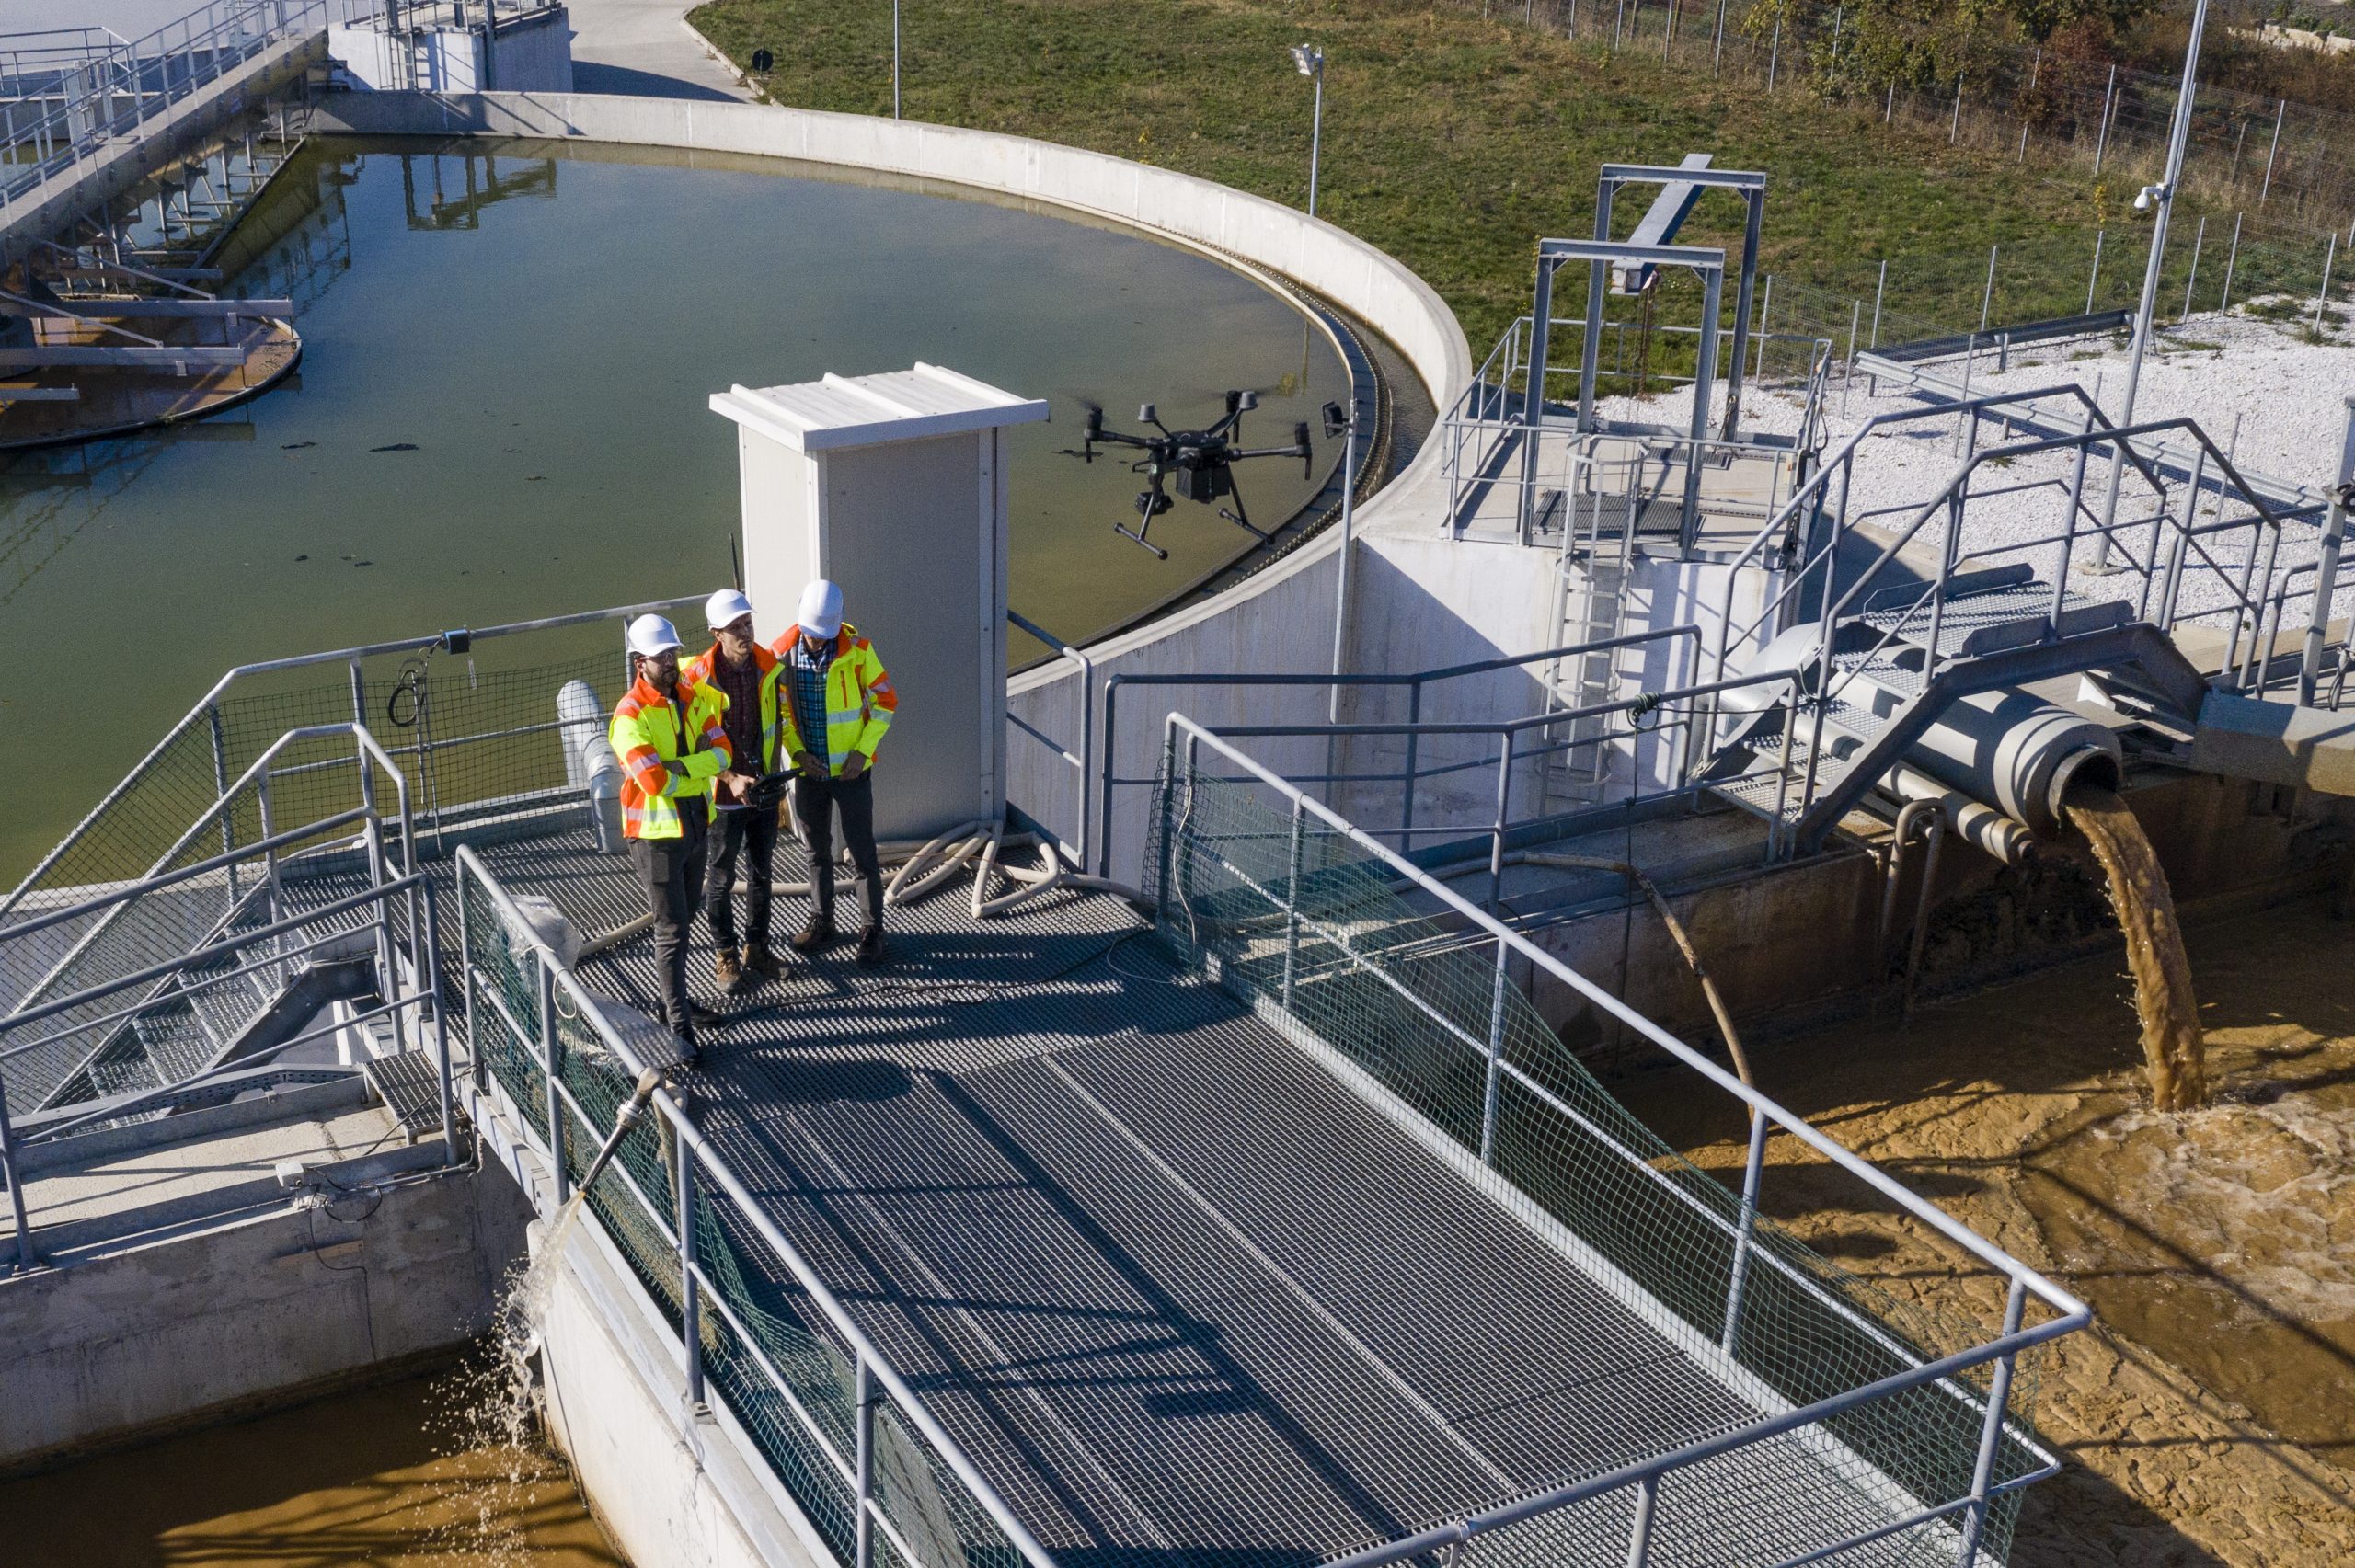 Three employees in PPE flying a drone at a wastewater management site.